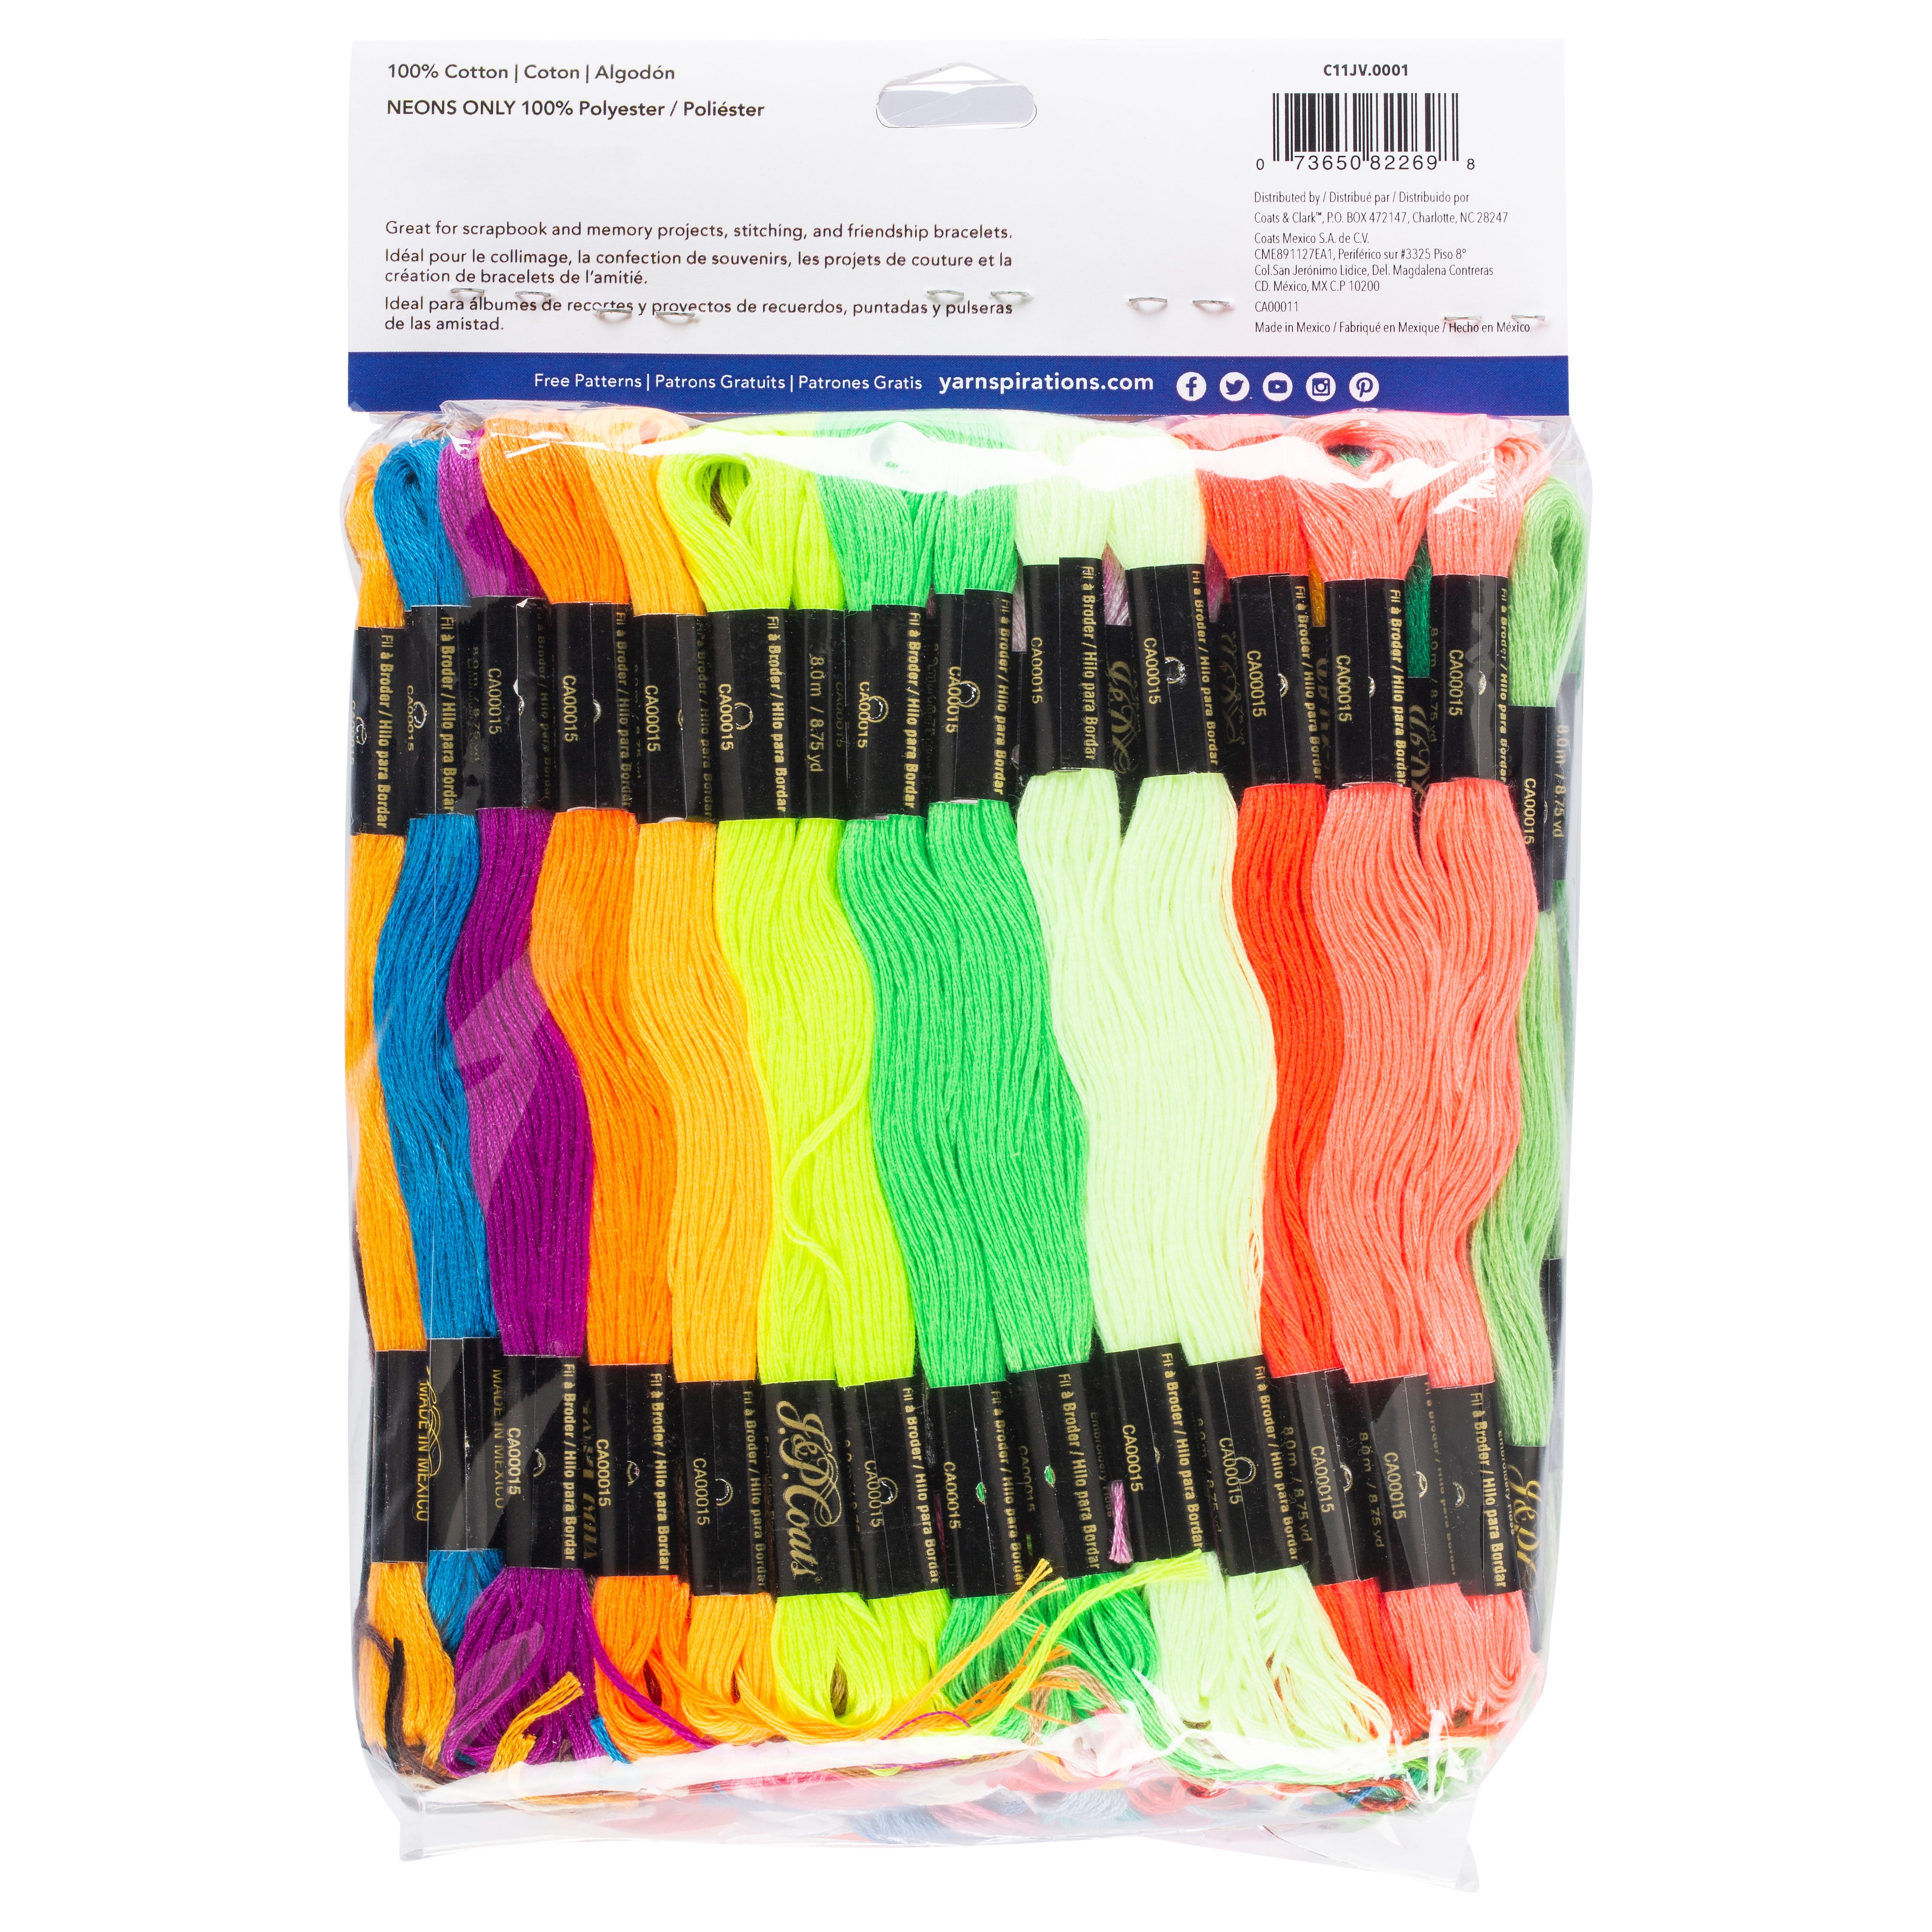 Coats & Clark 6-Strand BLACK Embroidery Floss Lot of 15 Skeins